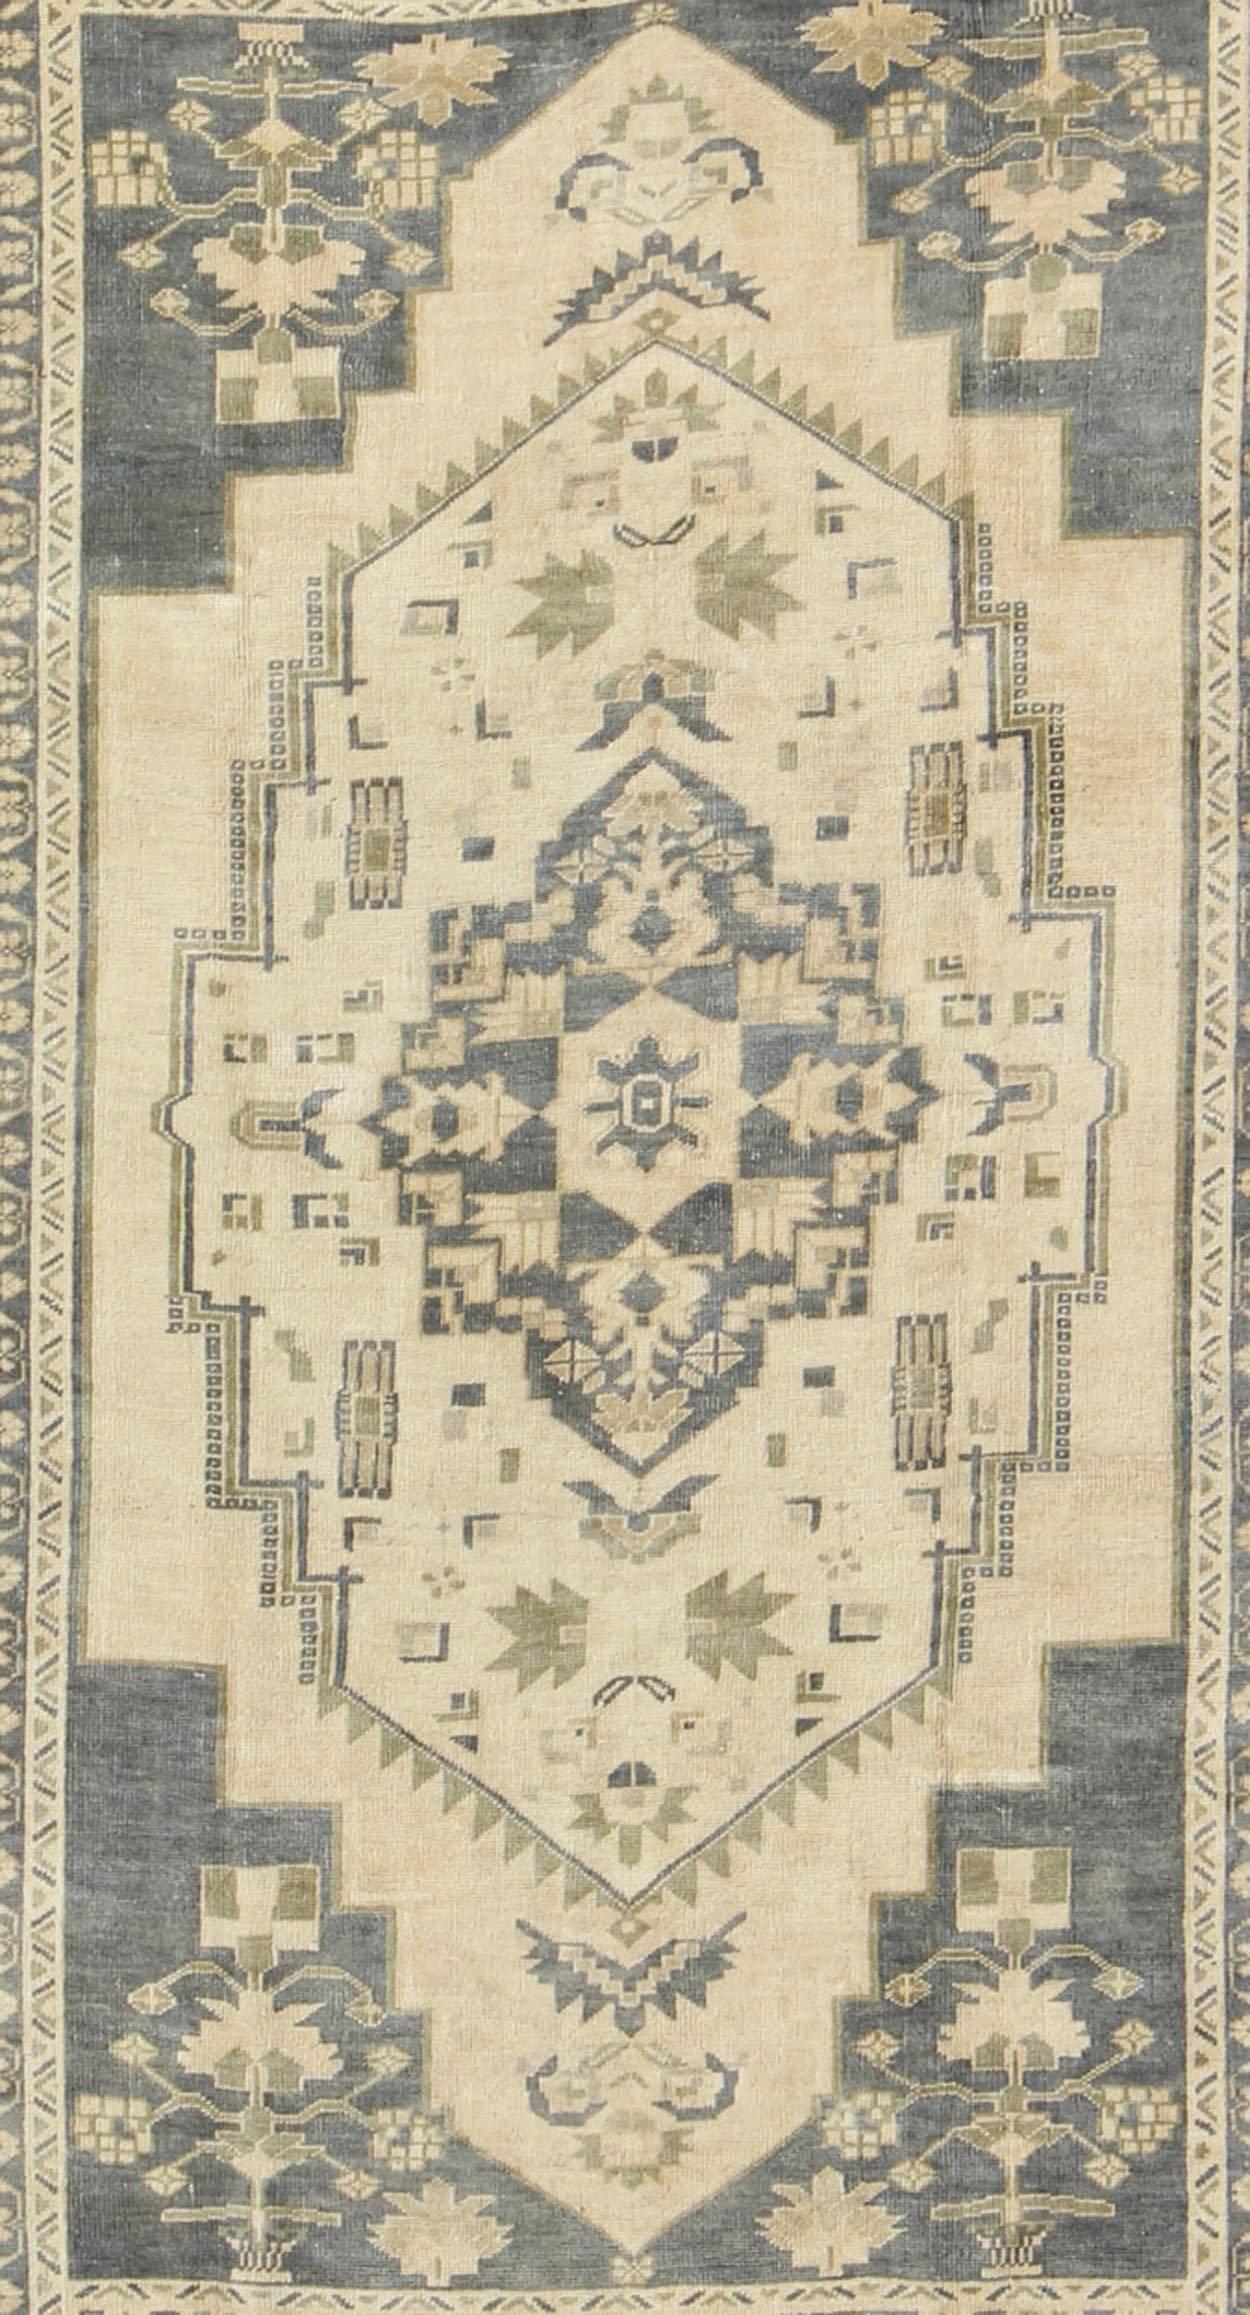 Hand-Knotted Blue Gray and Cream Mid-20th Century Turkish Oushak Rug with Medallion, Cornices